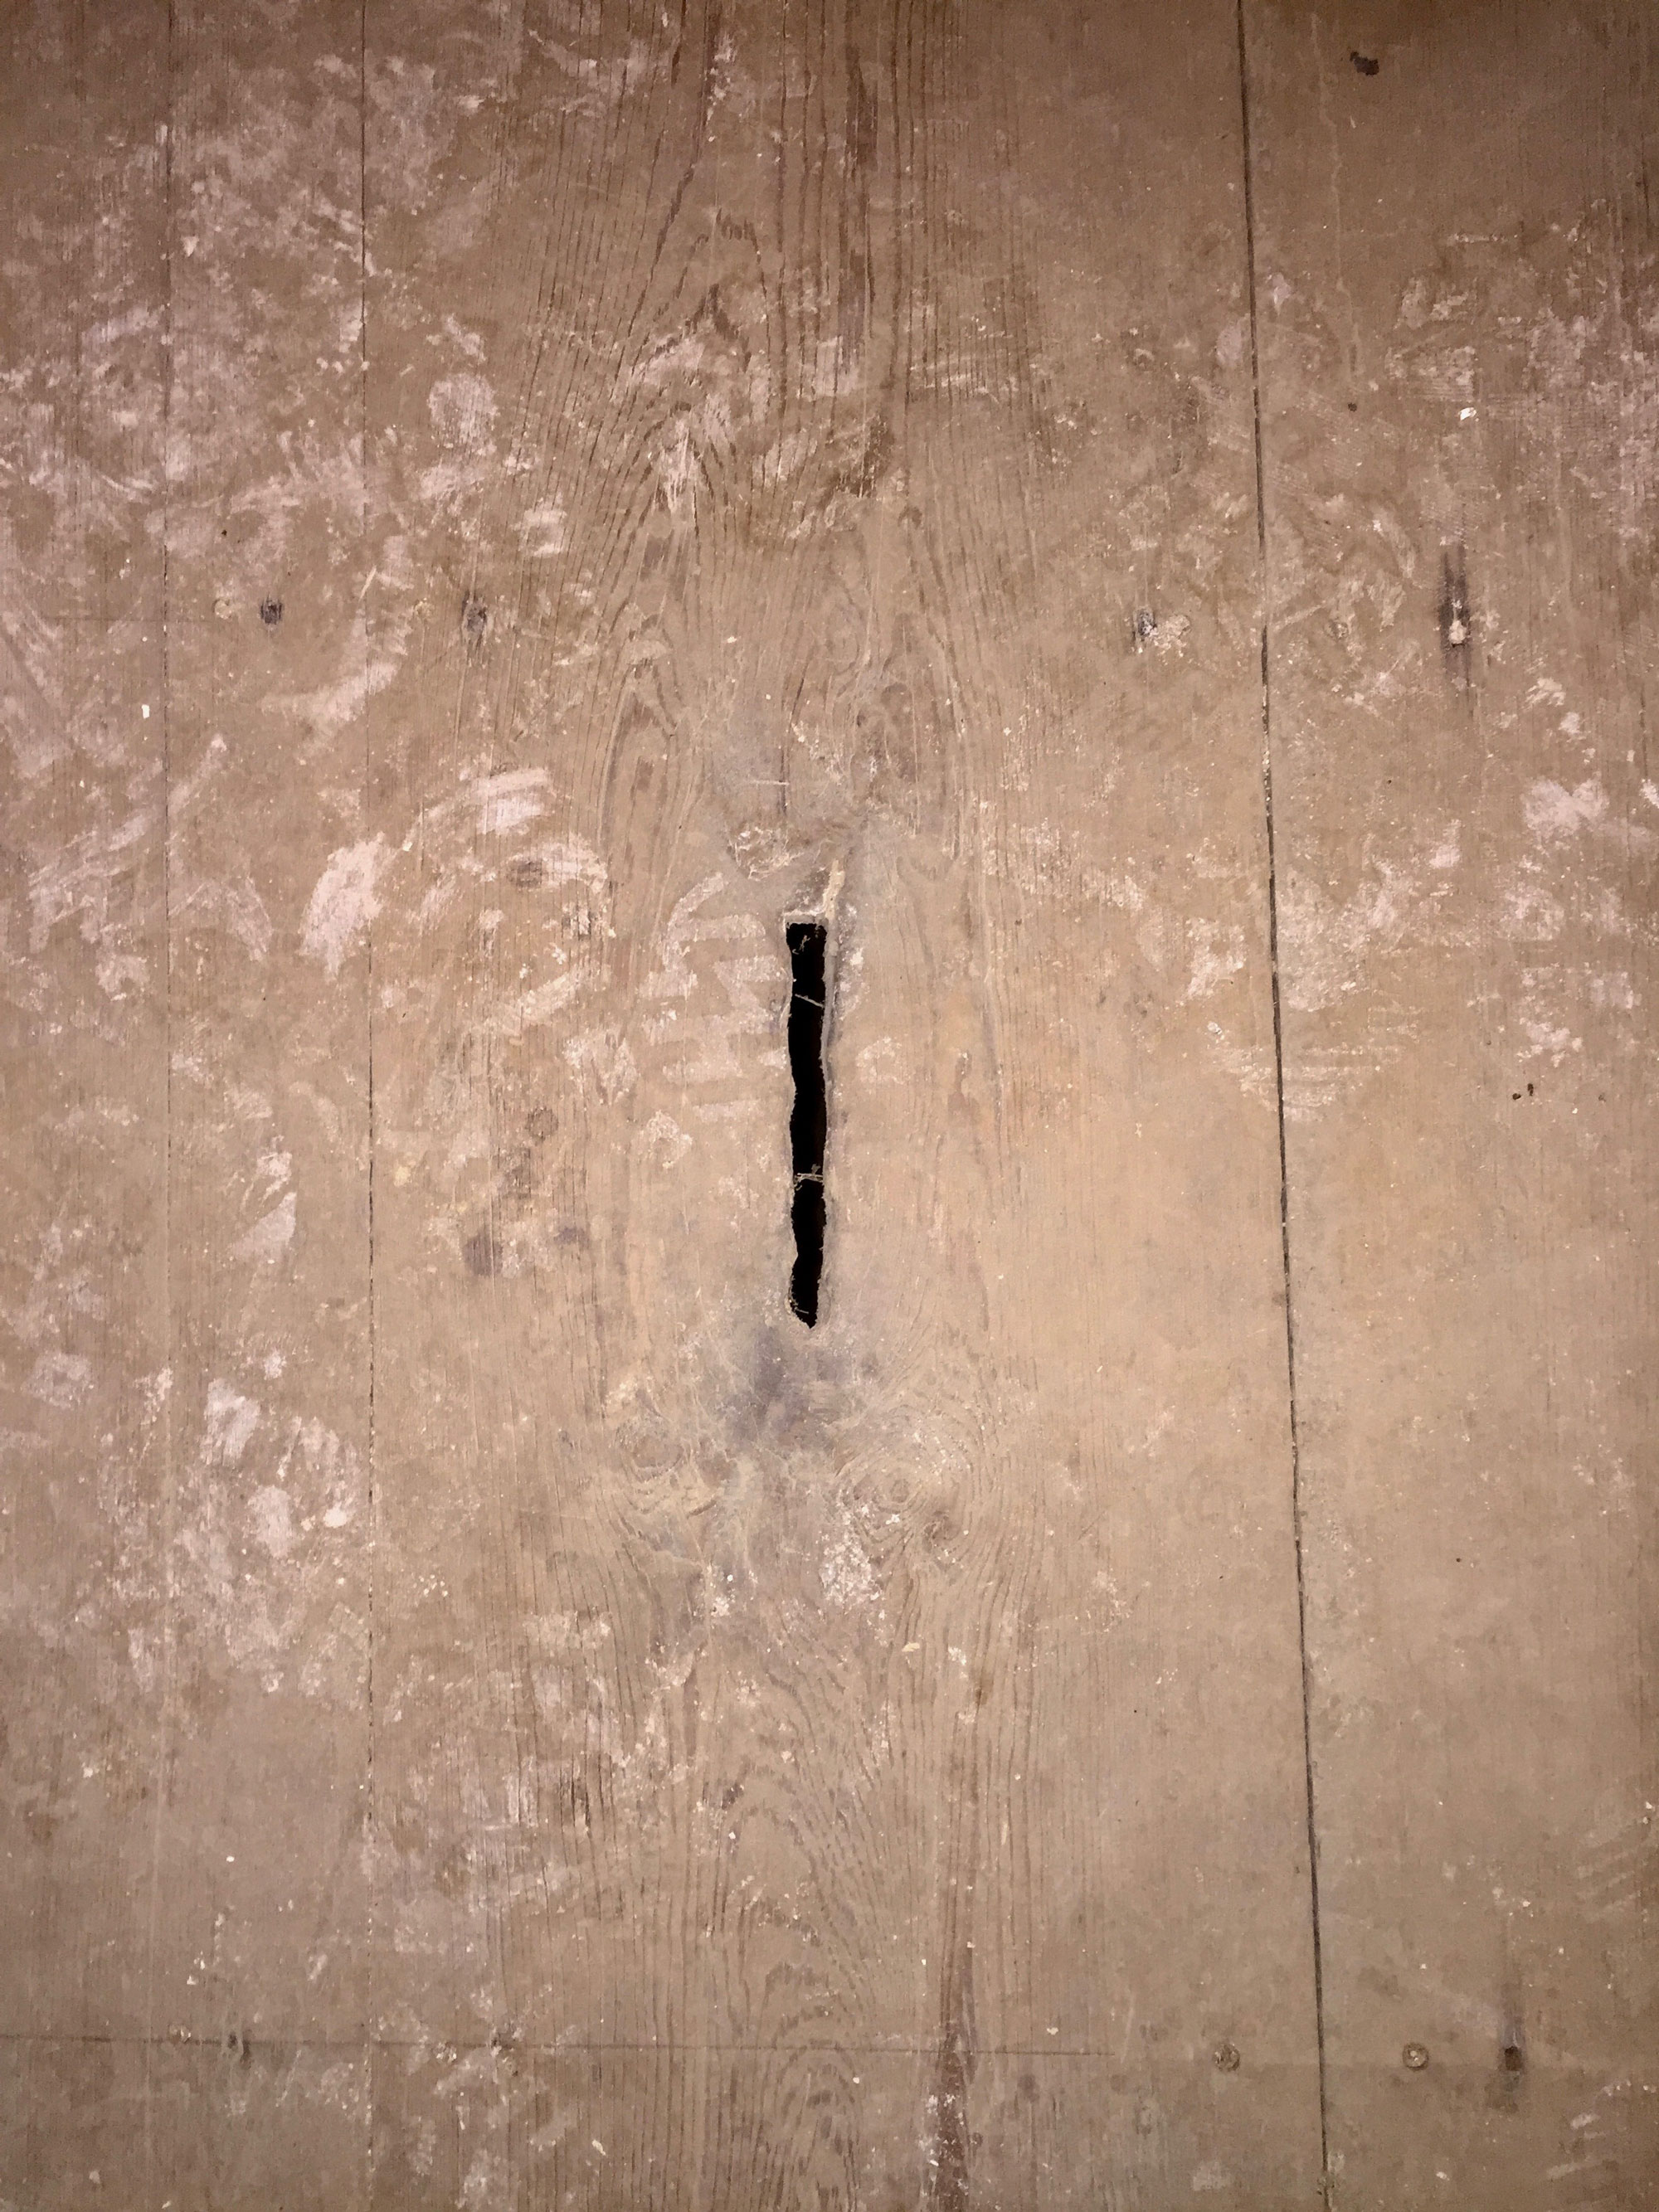 Mysterious slit in old floorboards